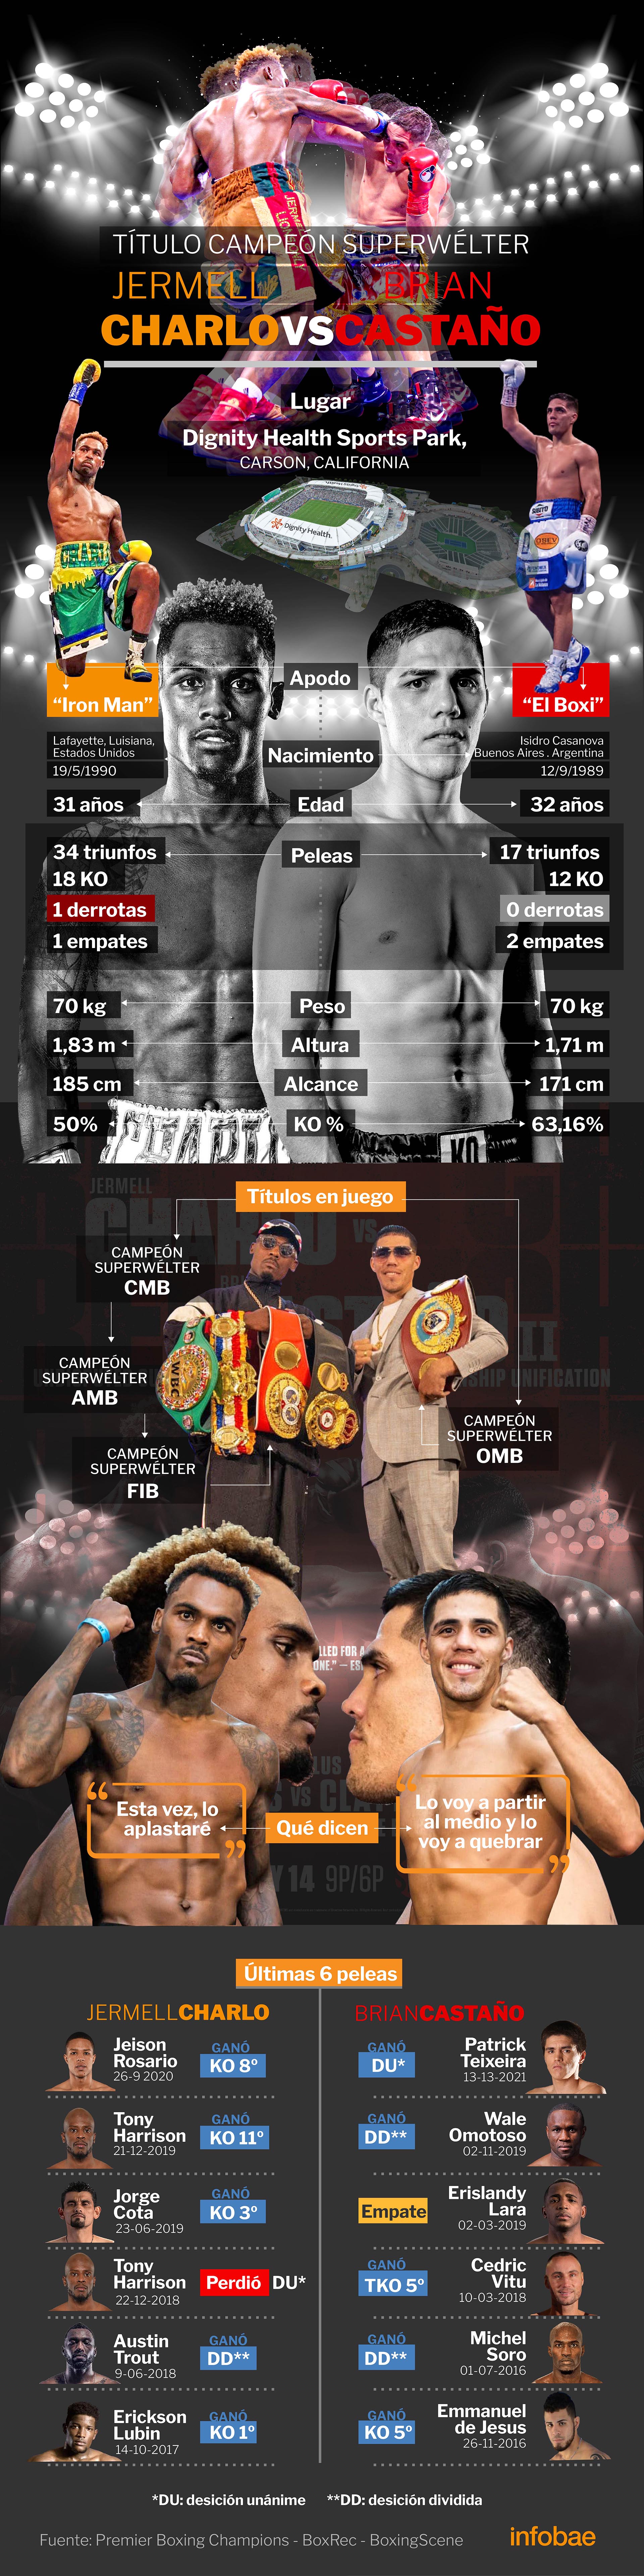 All you need to know about the fight (Infographic: Marcelo Regalado)